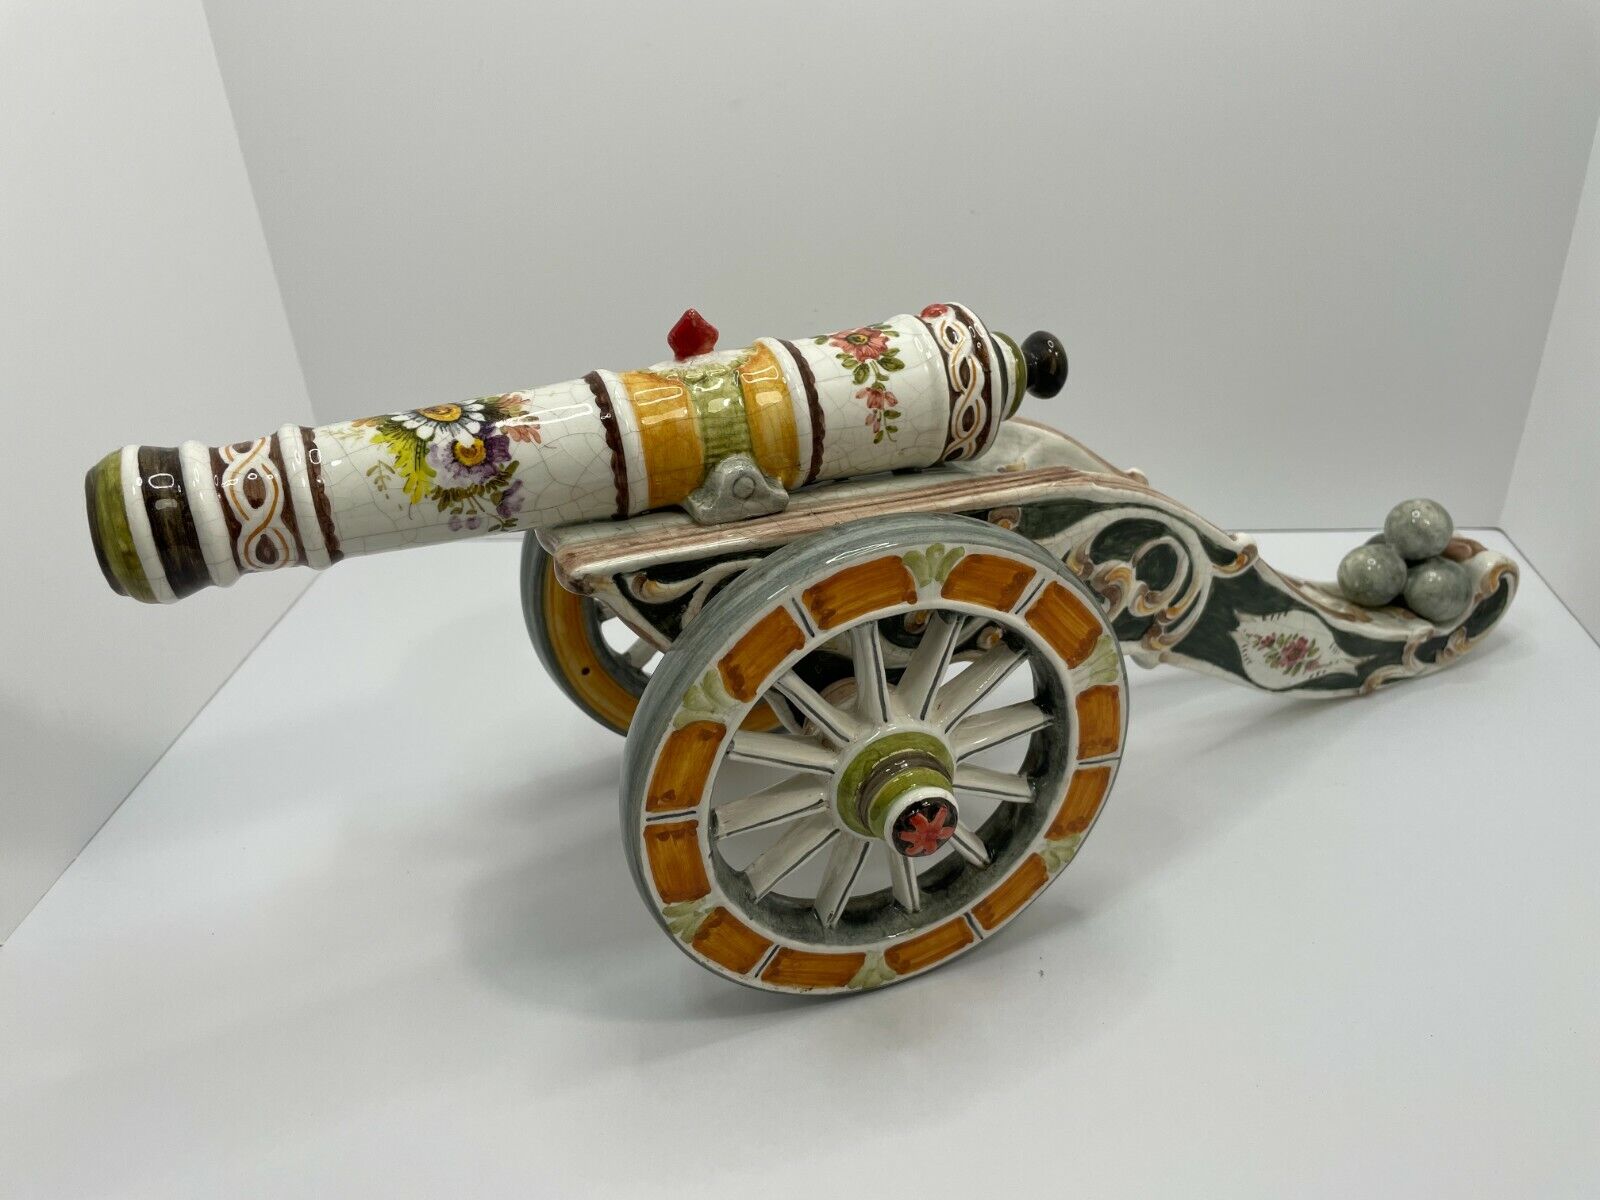 Rare Vtg Early Giovanni/Jose Ronzan Porcelain Italian Cannon Hand Painted Signed